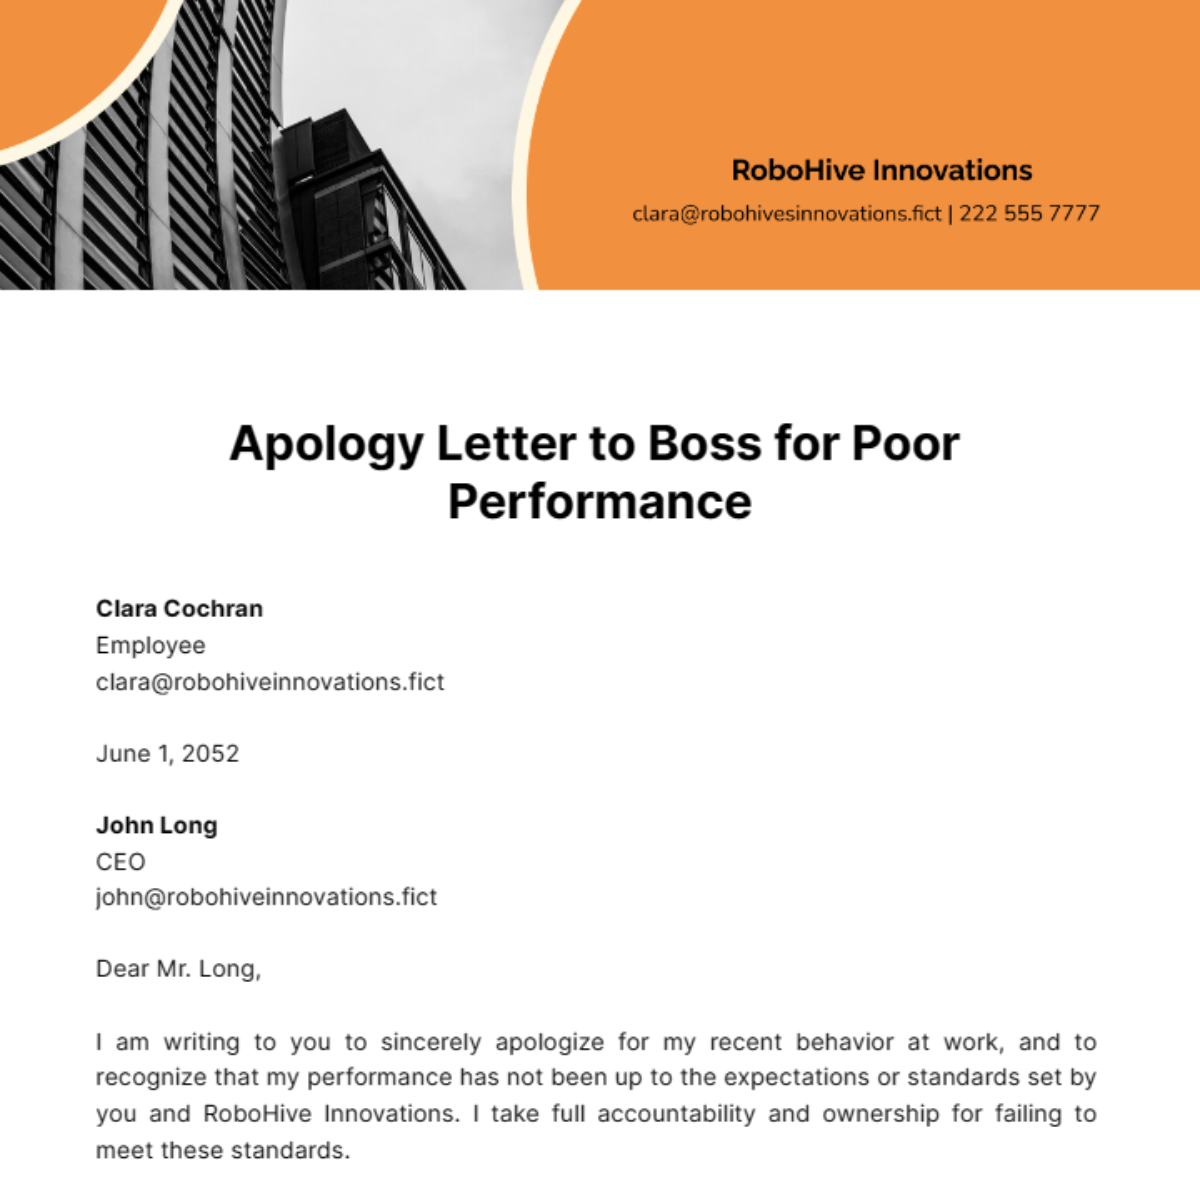 Apology Letter to Boss for Poor Performance Template